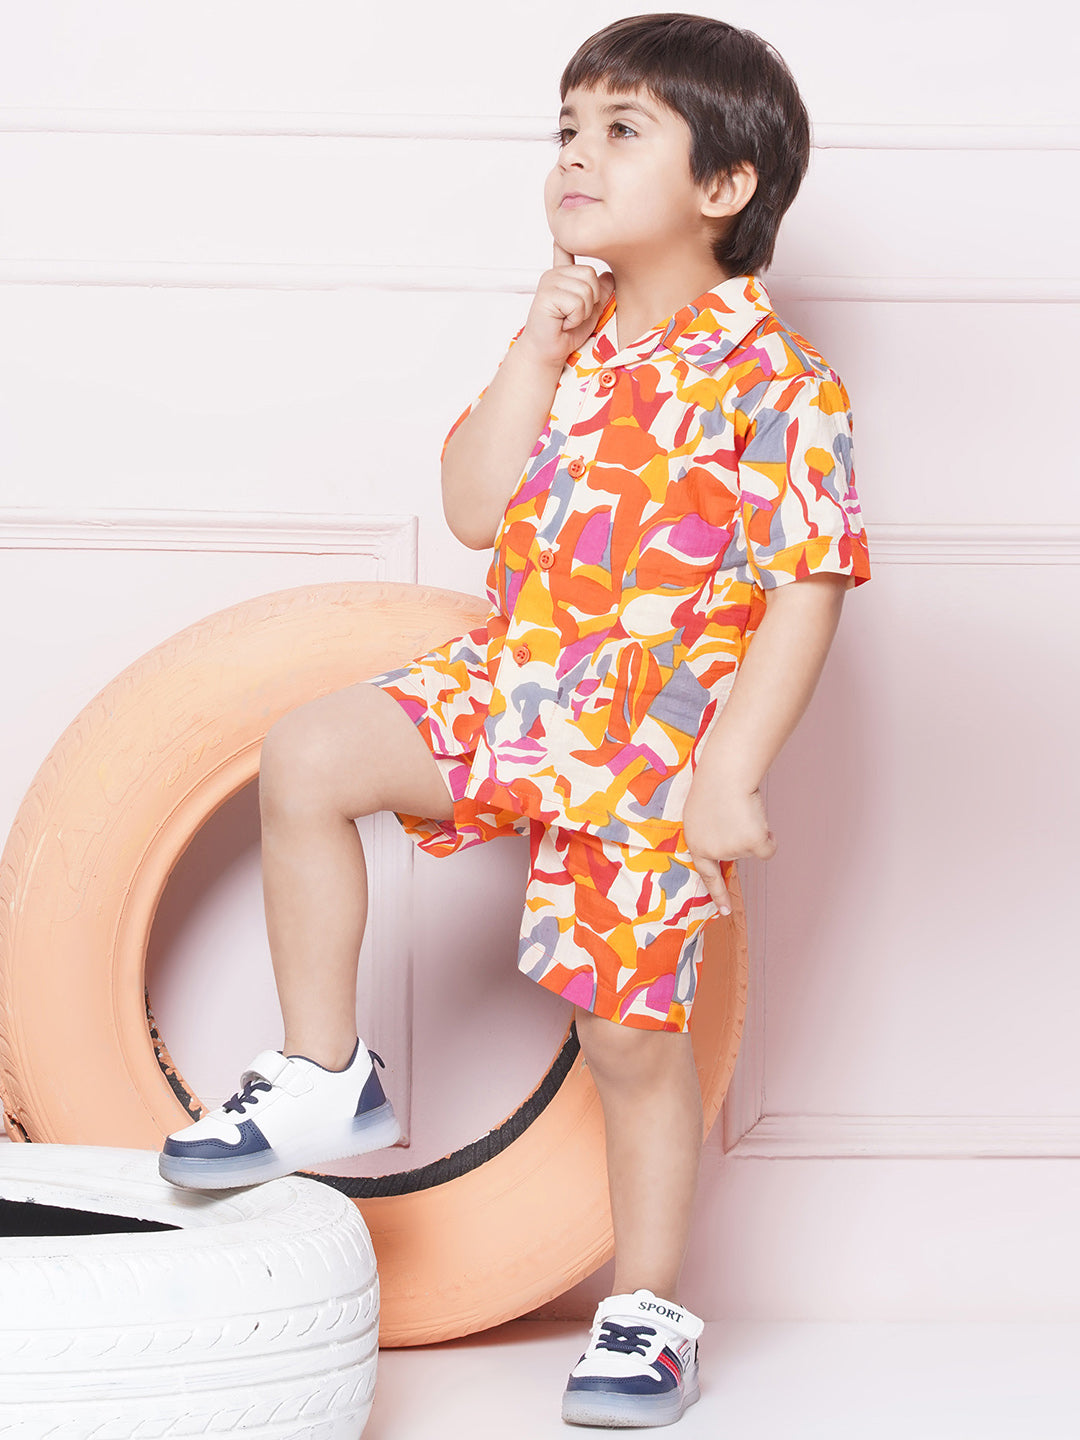 Orange Cotton Shirt & shorts Half Sleeves with Collar and Abstract Print CO-ORDS Set for Boys